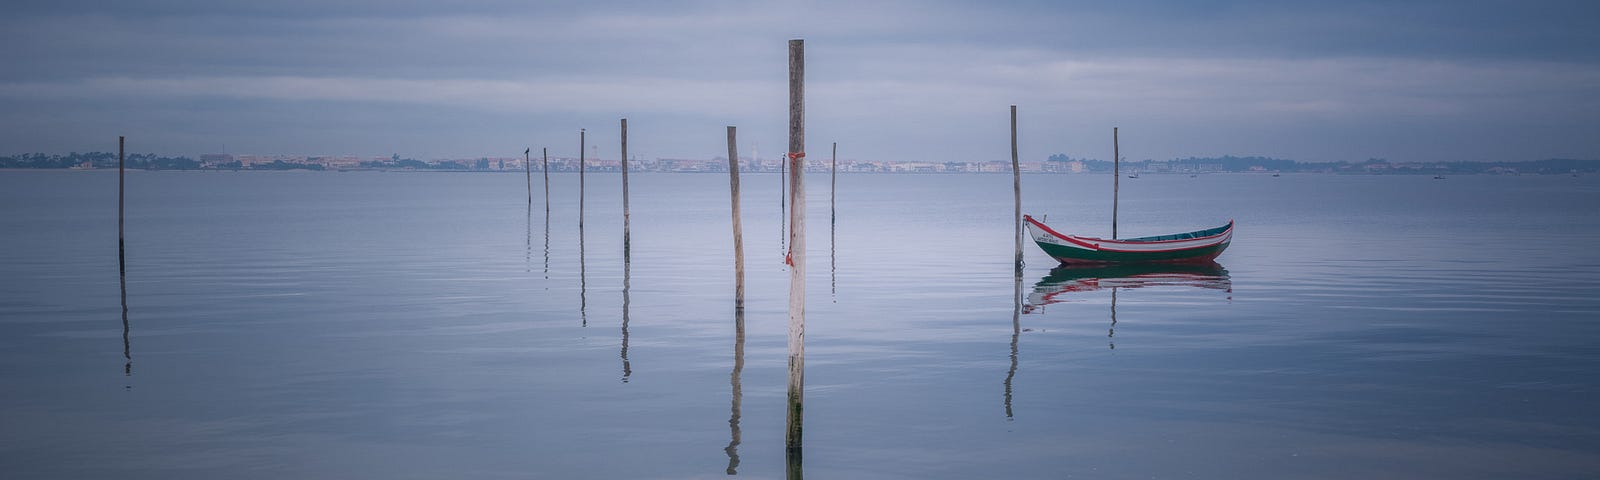 Still waters. No waves. Some sticks standing in the water. One boot. Image in blue grey tune. Stillness is our home.